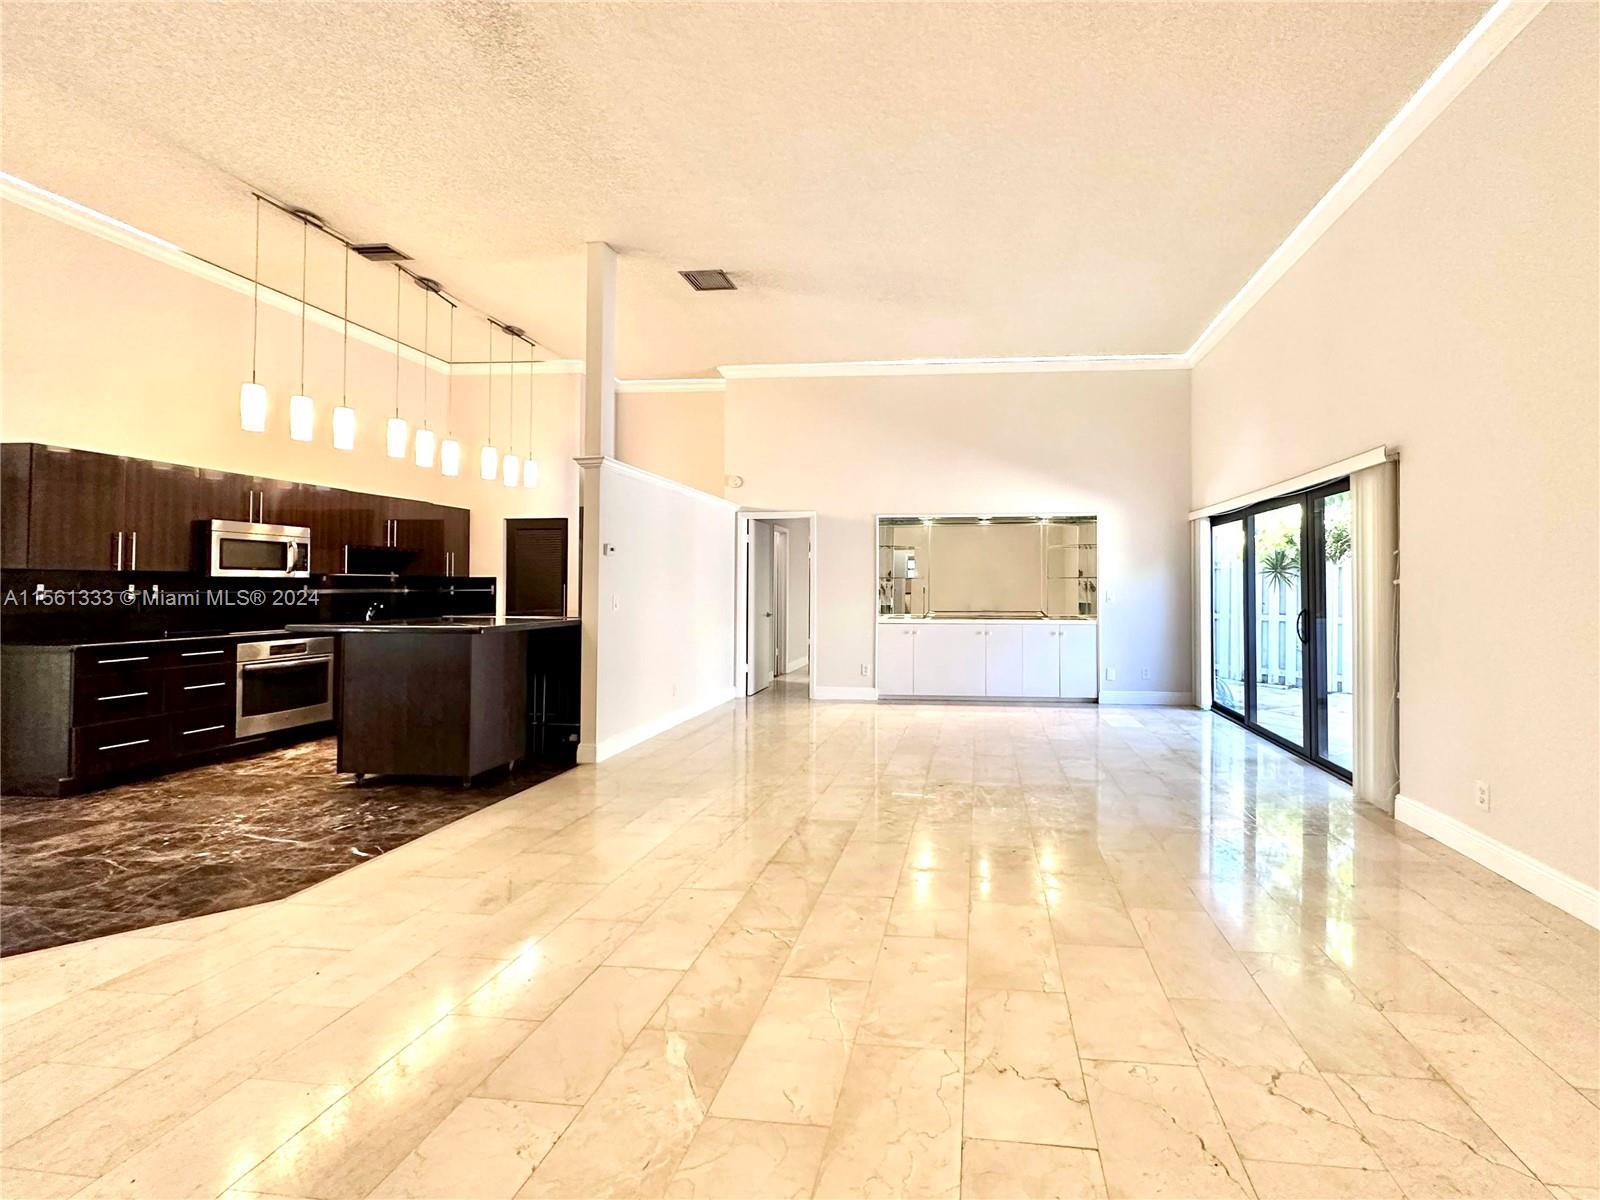 Welcome to a refined 3Beds / 2Baths haven in Hallandale Beach. This timeless residence boasts a spac